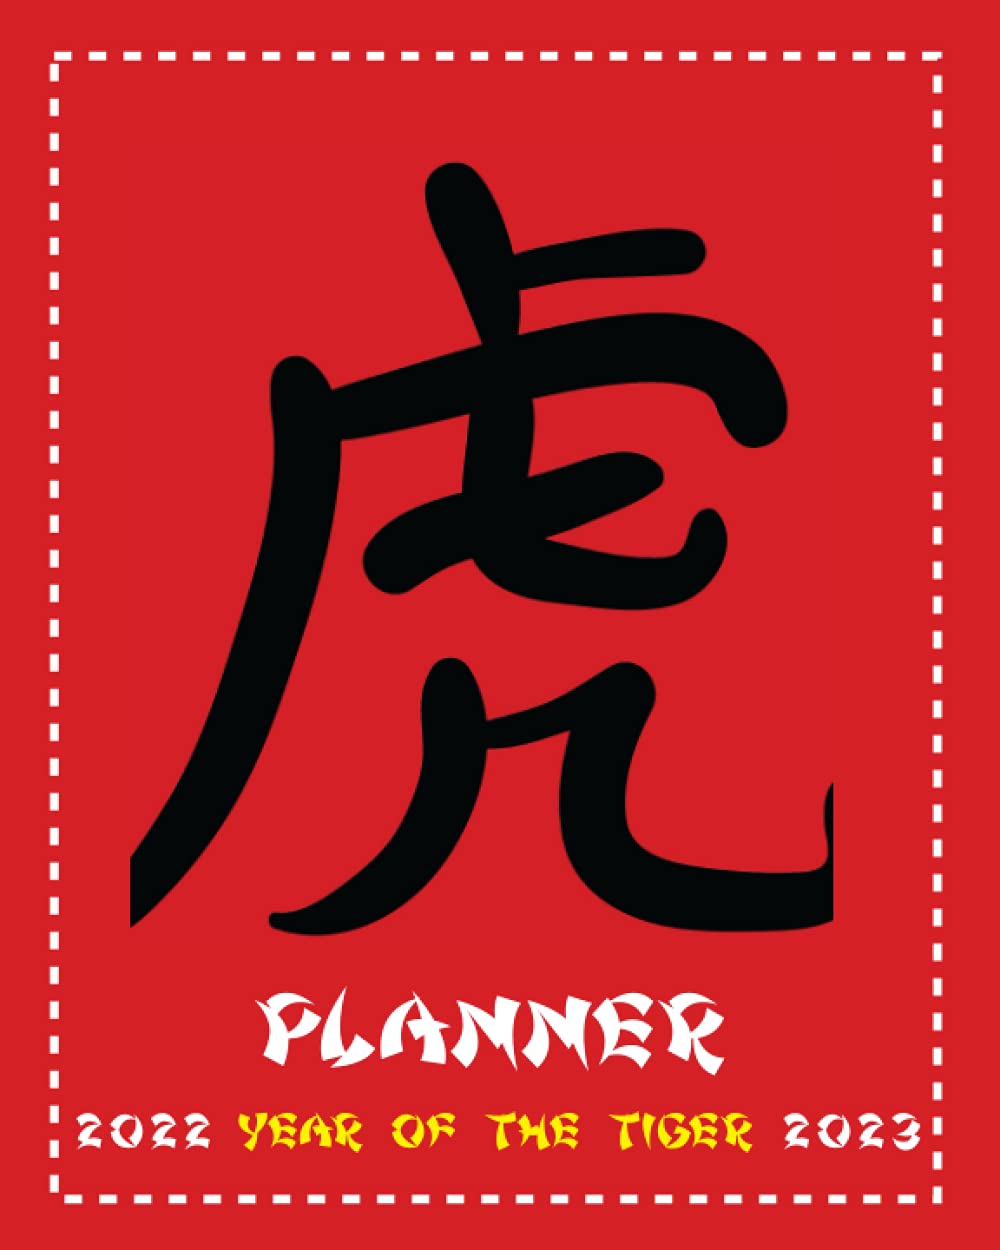 Planner Year of the Tiger 2022 2023: Happy Chinese New Year